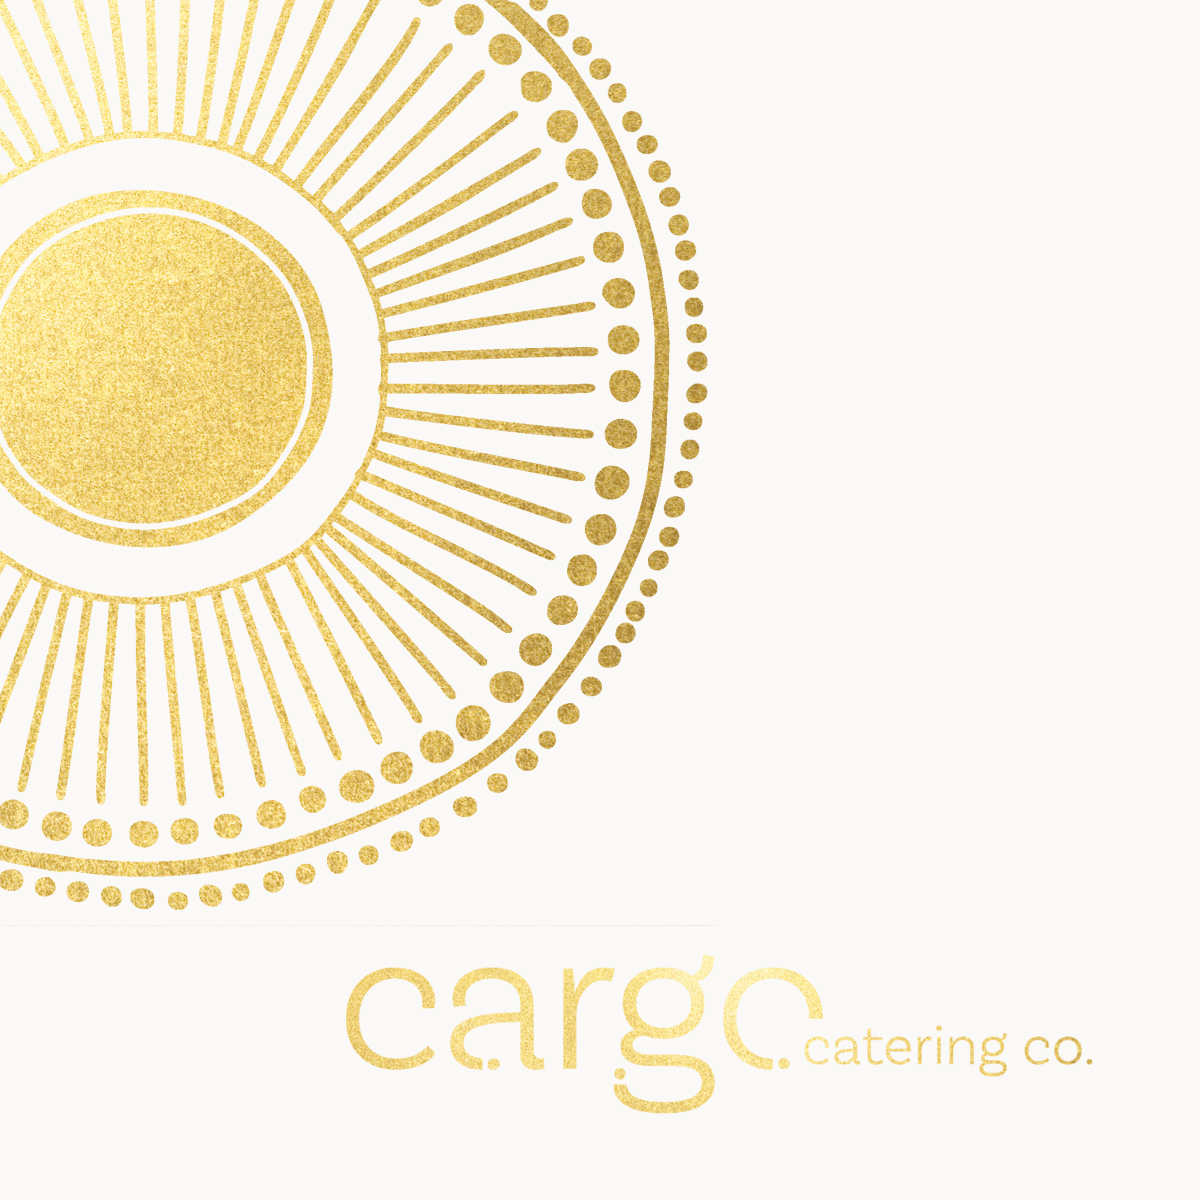 Cargo Caterging Co Logo 6